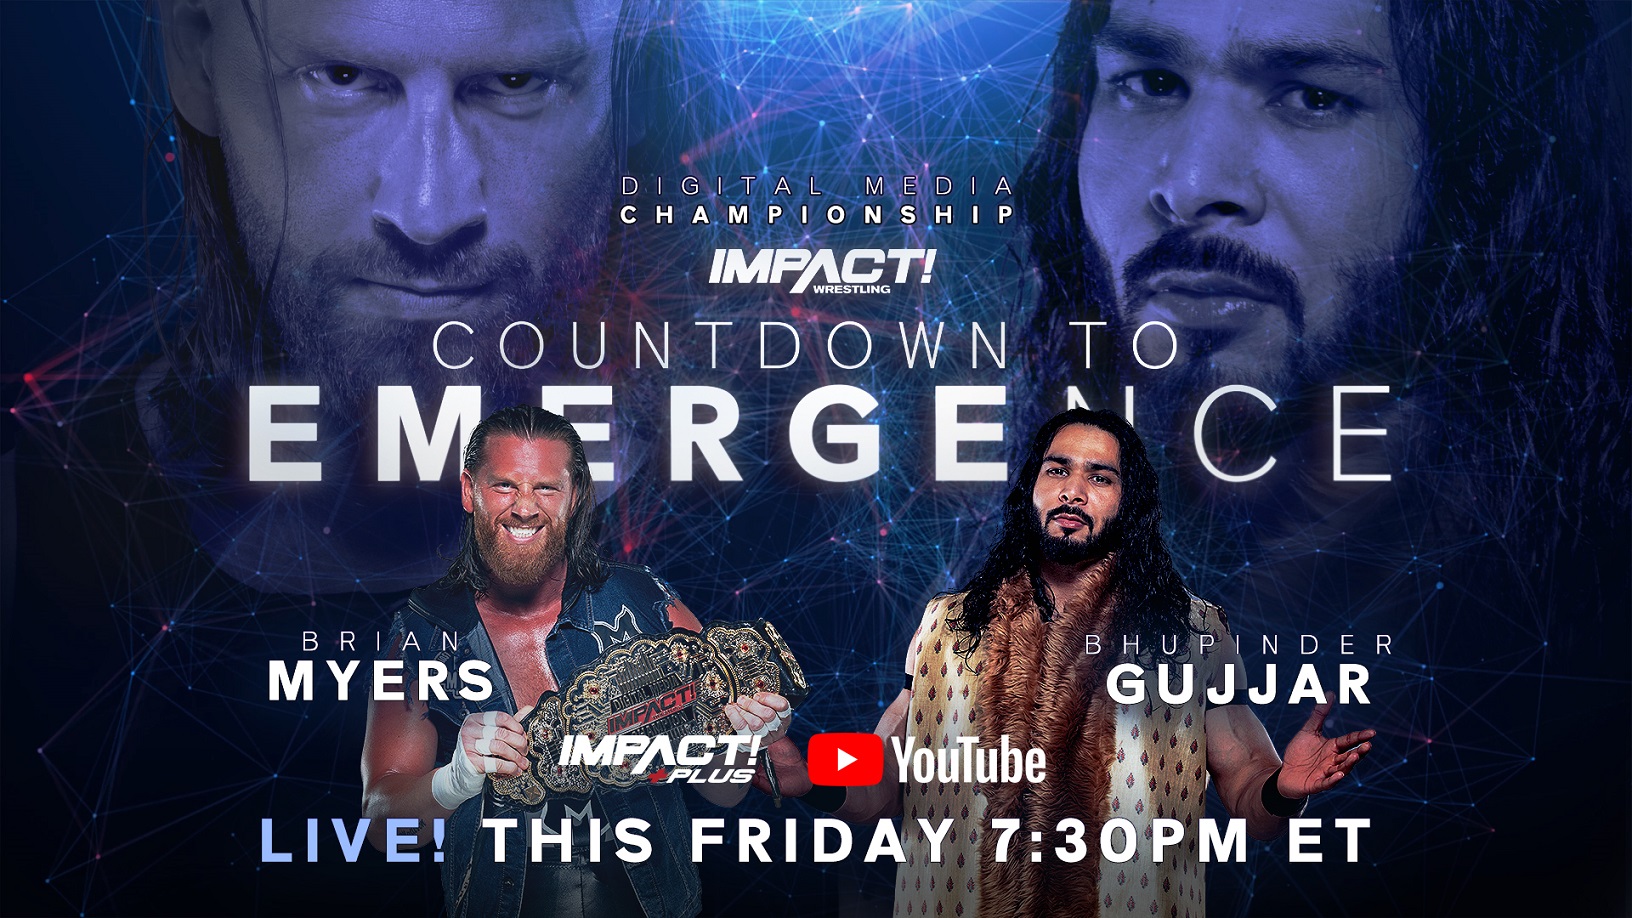 Bhupinder Gujjar Receives Long-Awaited Digital Media Title Shot vs Brian Myers, Plus More Championship Action on Countdown to Emergence